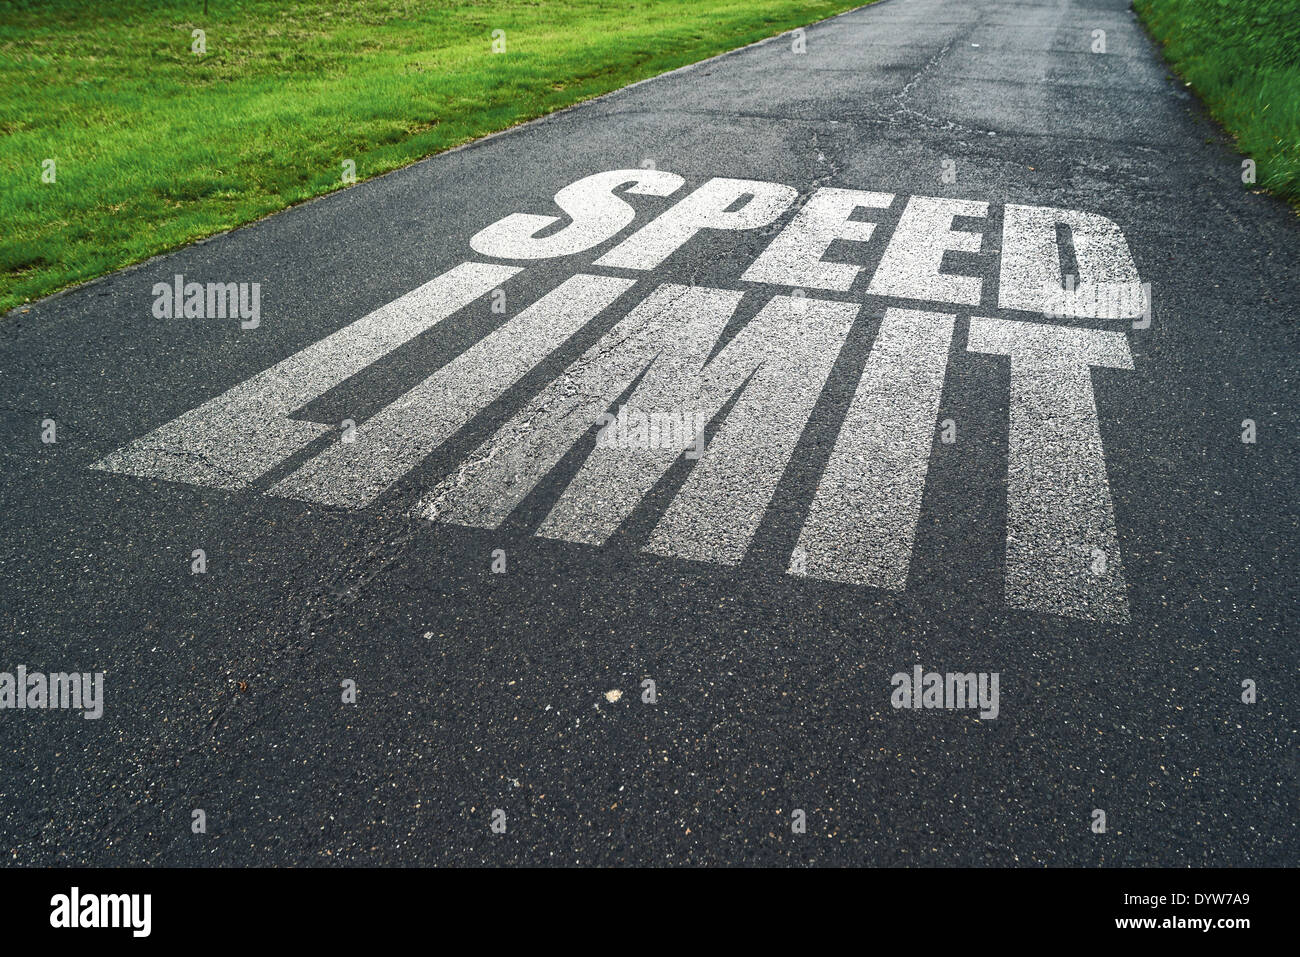 Speed Limit message reminder on asphalt road. Concept of safe driving and preventing traffic accident. Stock Photo